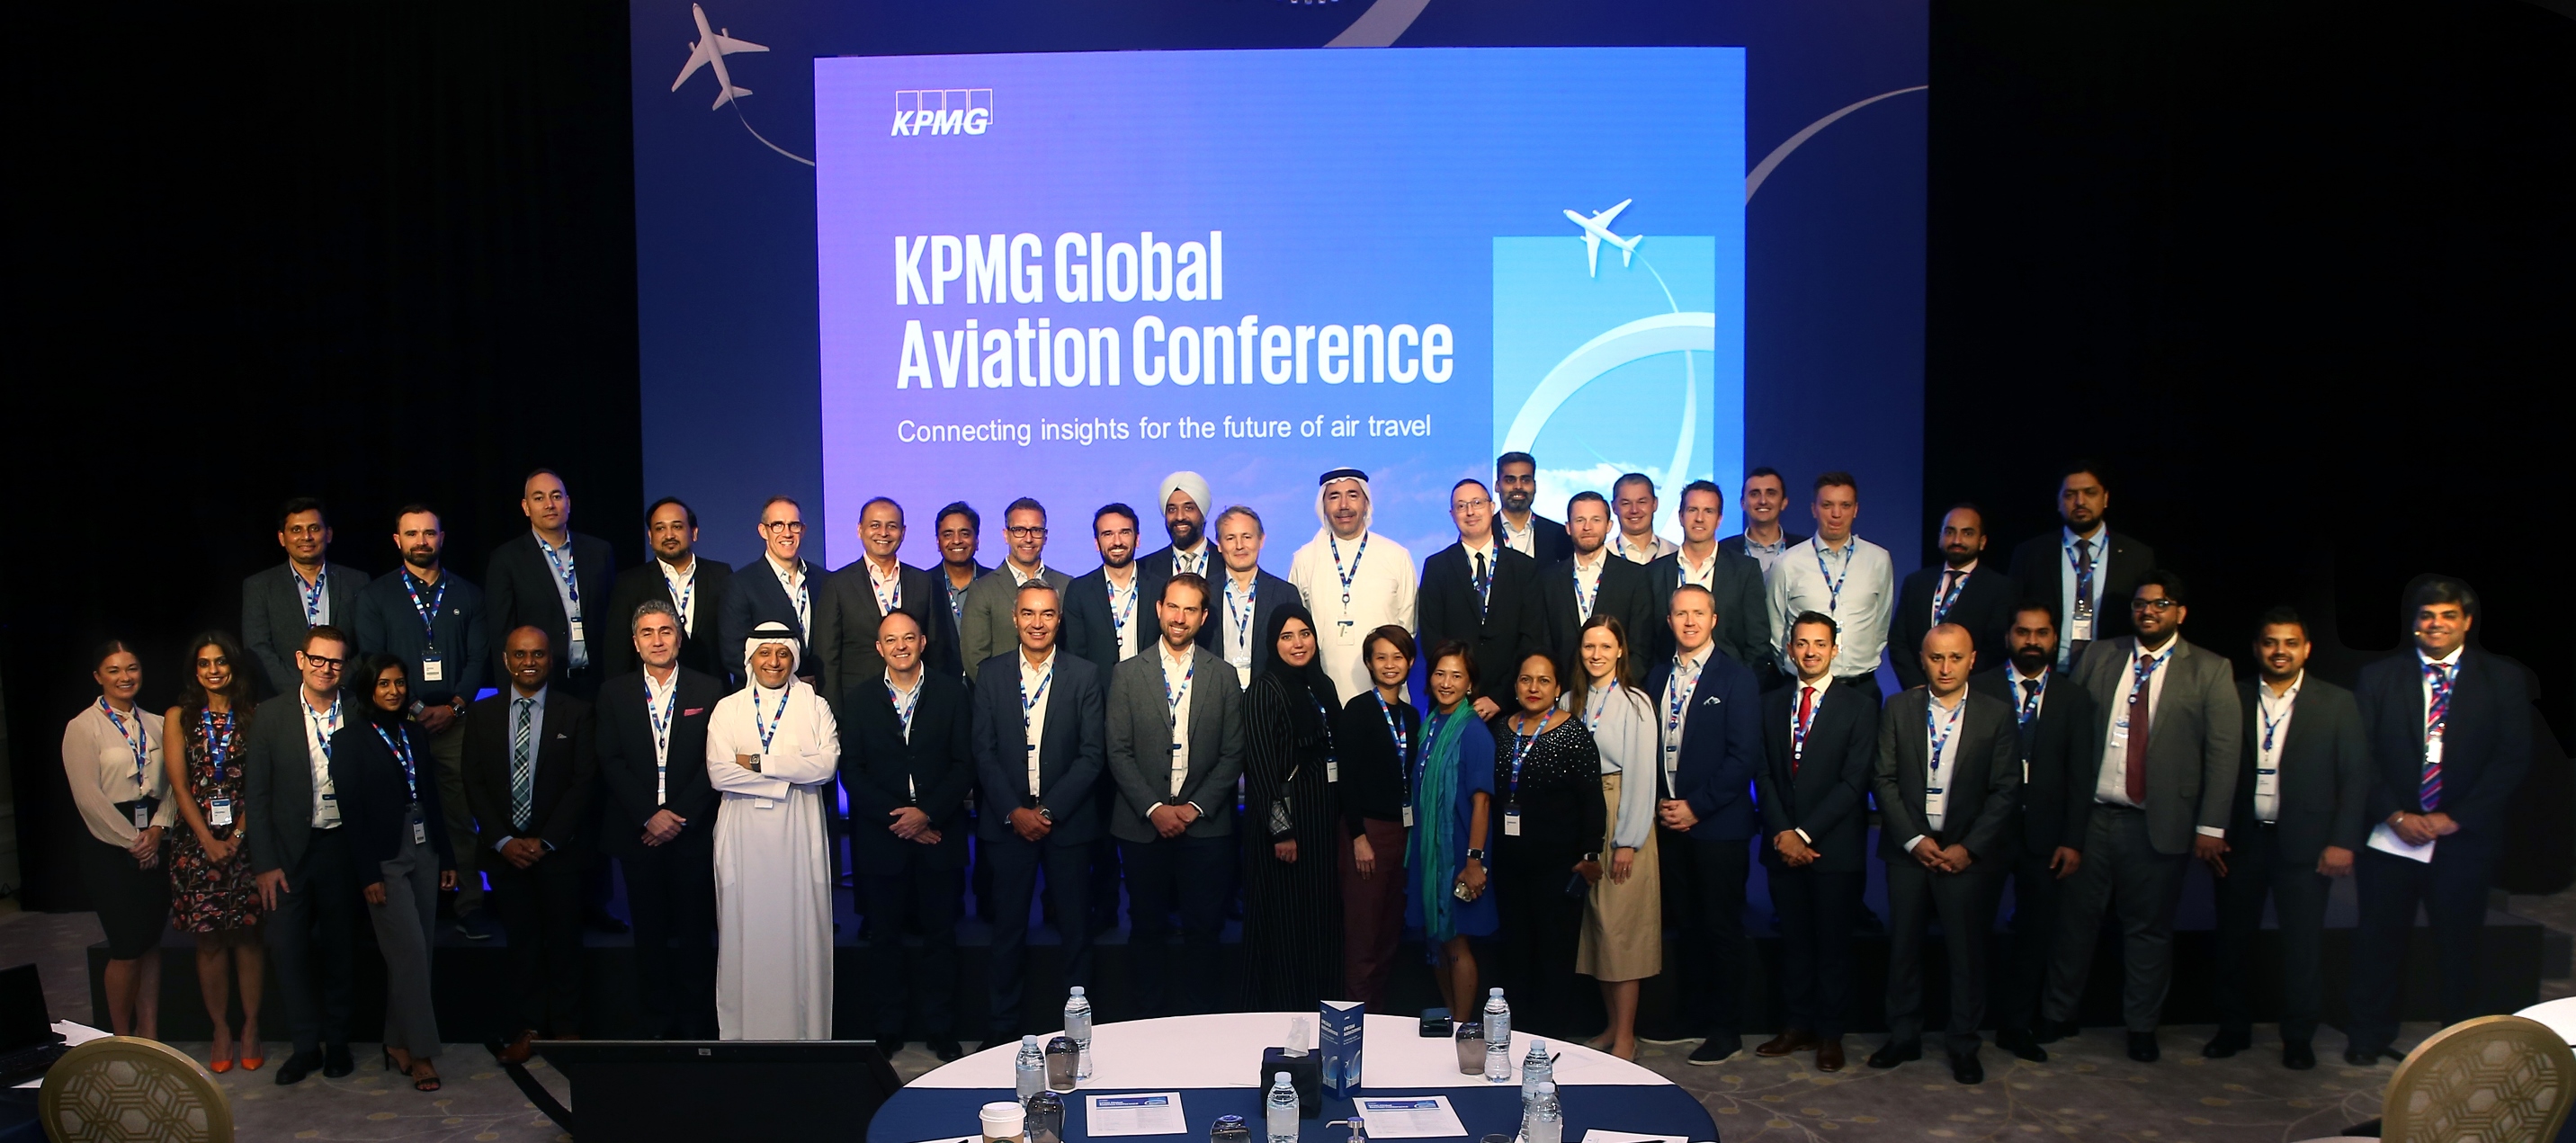 Top airline executives discuss the future of aviation at KPMG’s annual Global Aviation Conference in Dubai